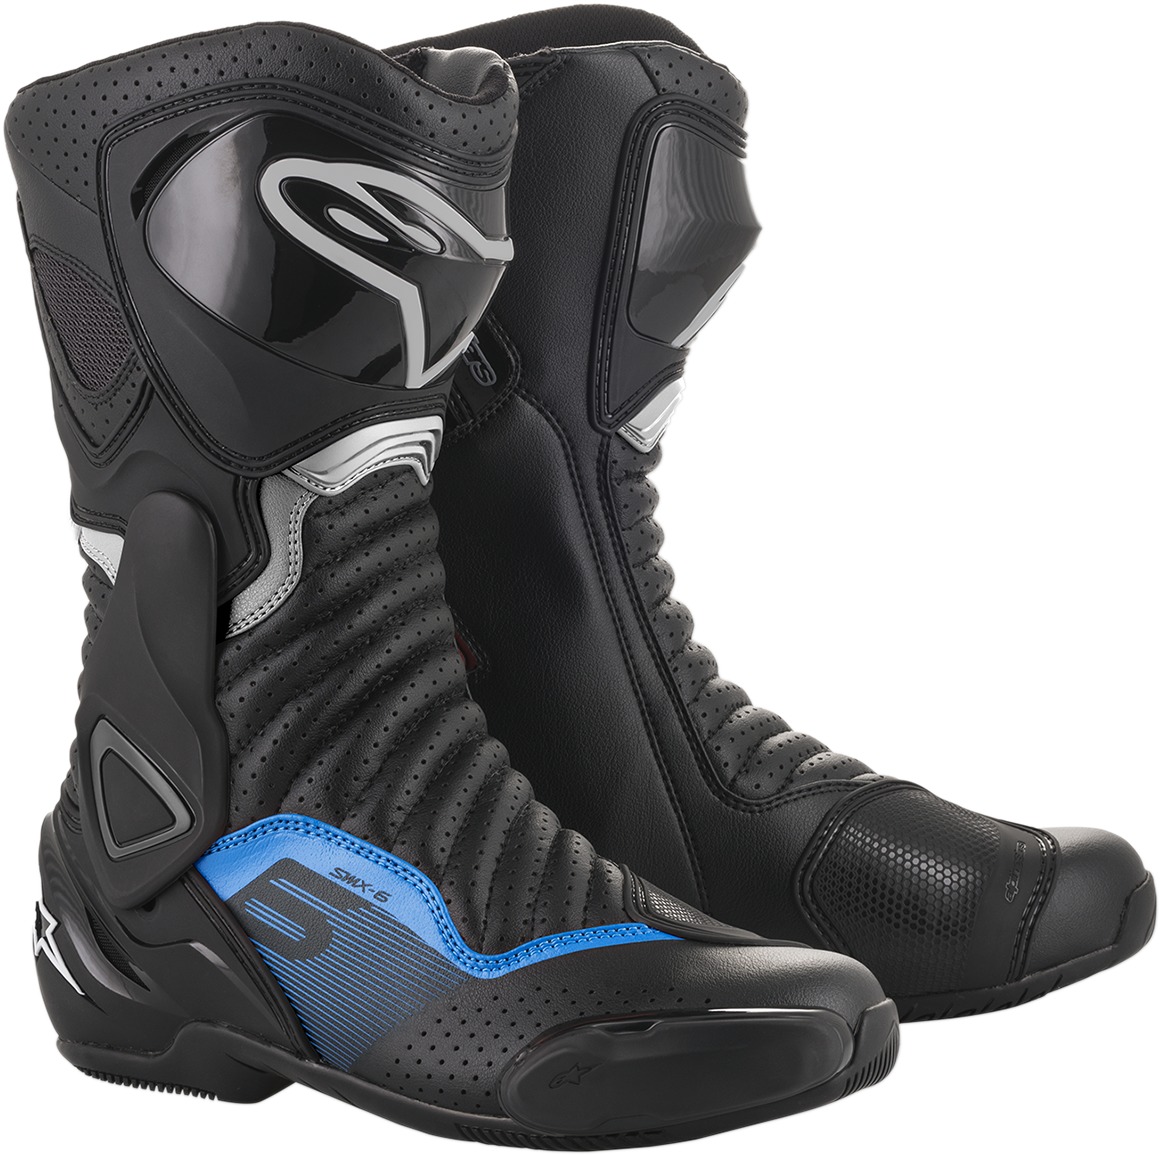 SMX-6 v2 Street Riding Boots Black/Blue/Gray/White US 10.5 - Click Image to Close